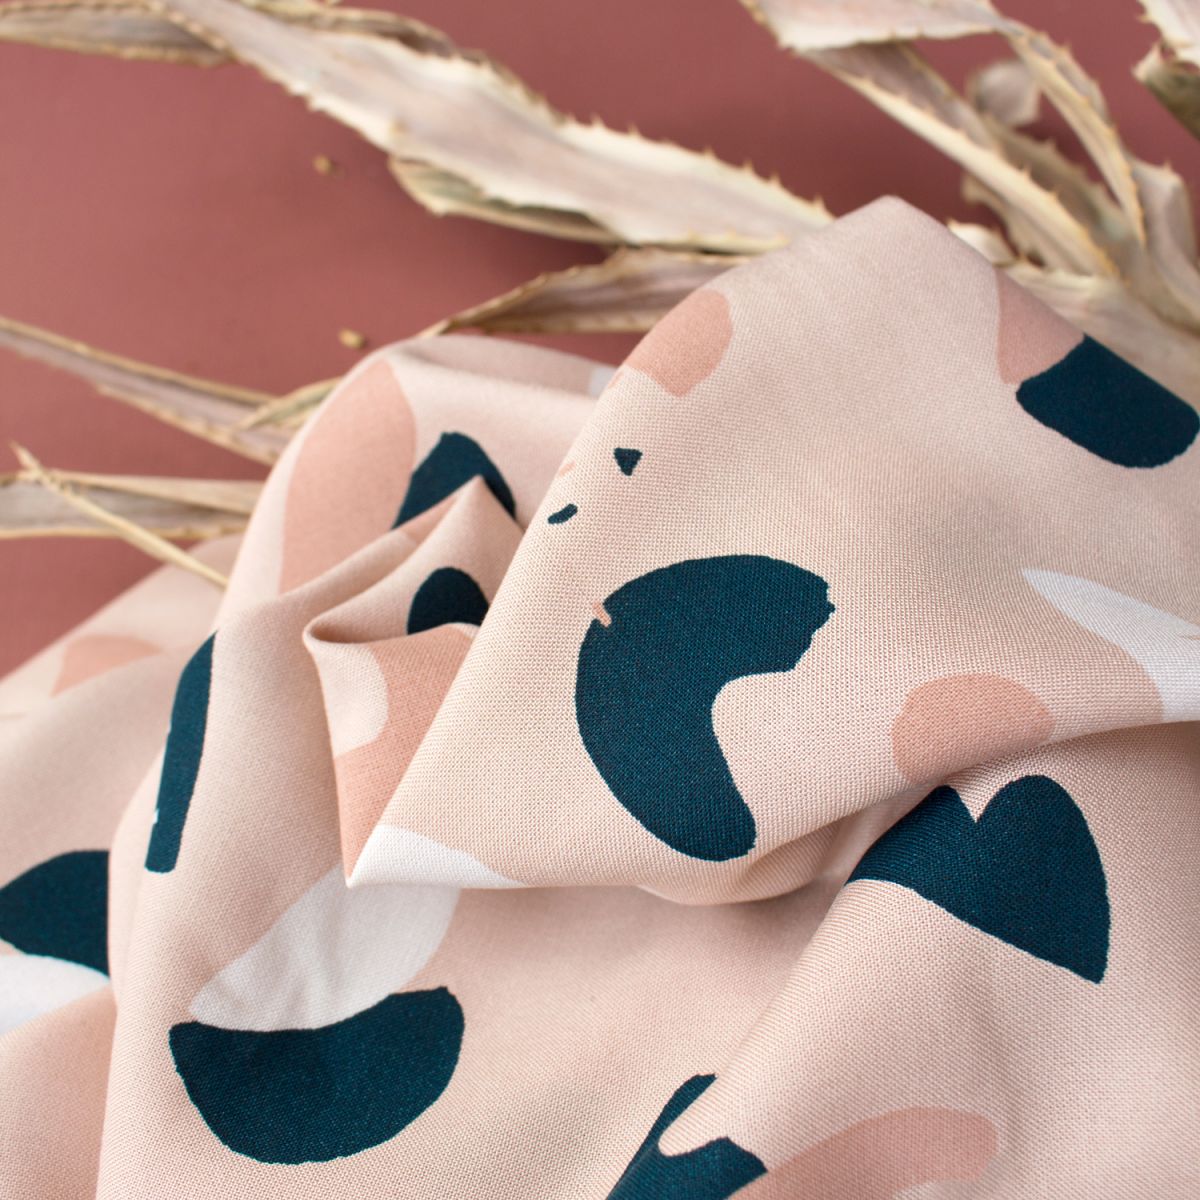 oasis blush fabric by atelier brunette